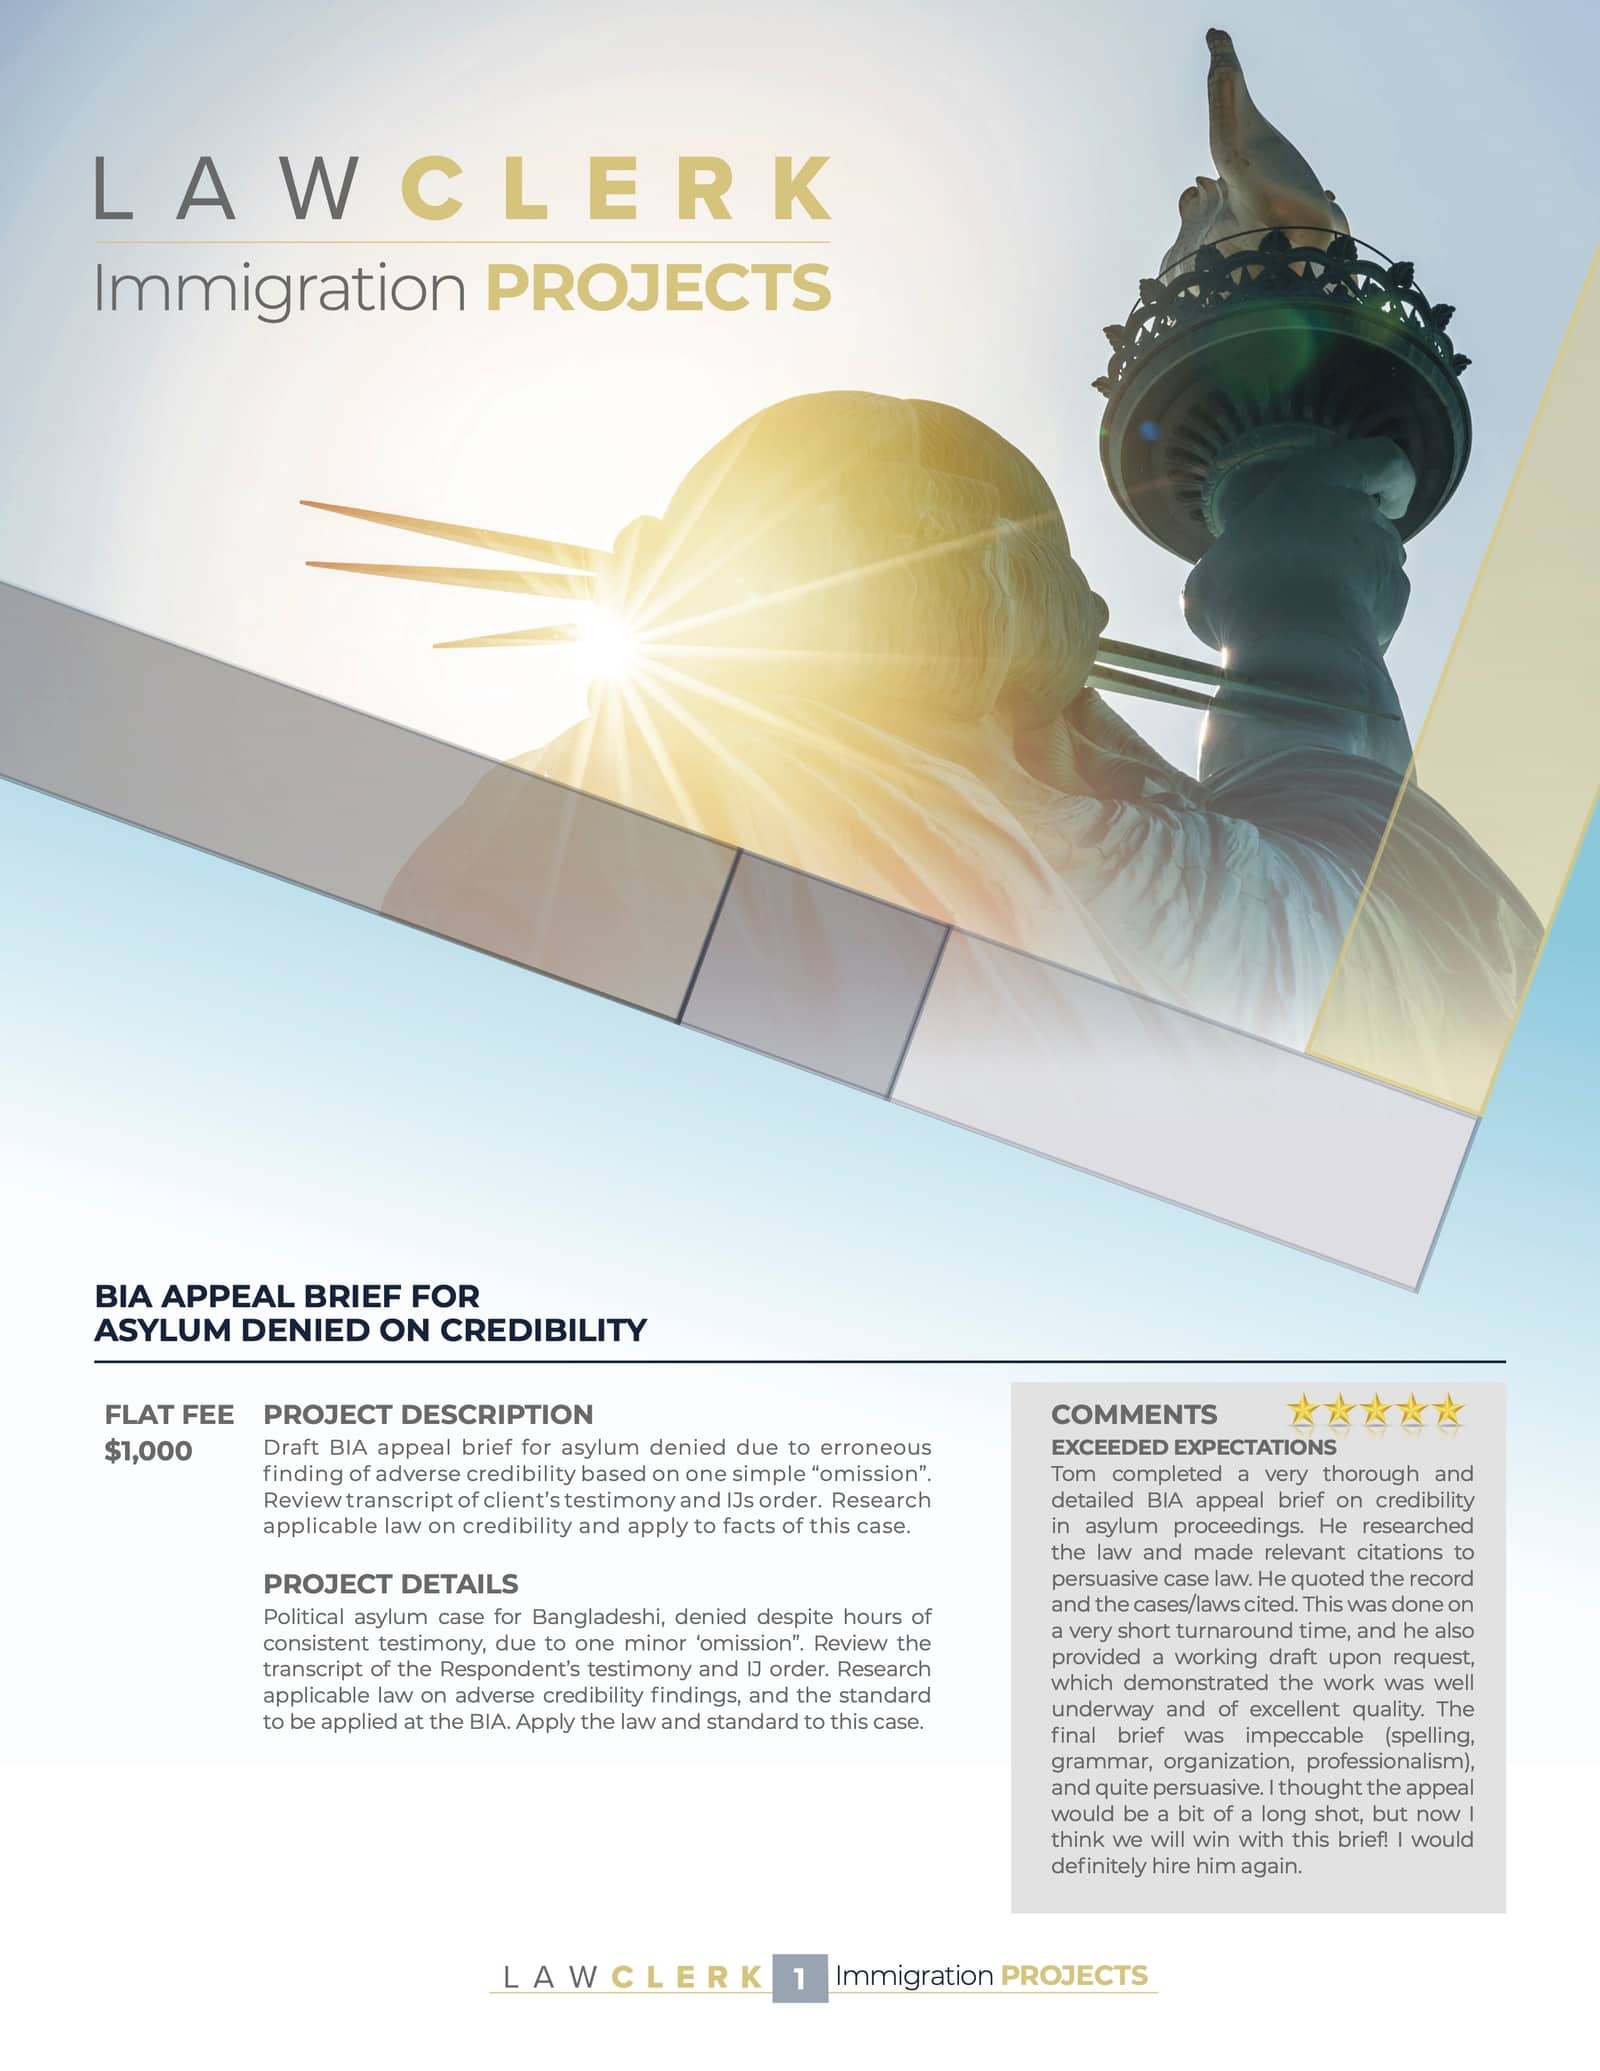 Areas_Of_Law_Project_Sheets-Immigration FINAL-p-1600